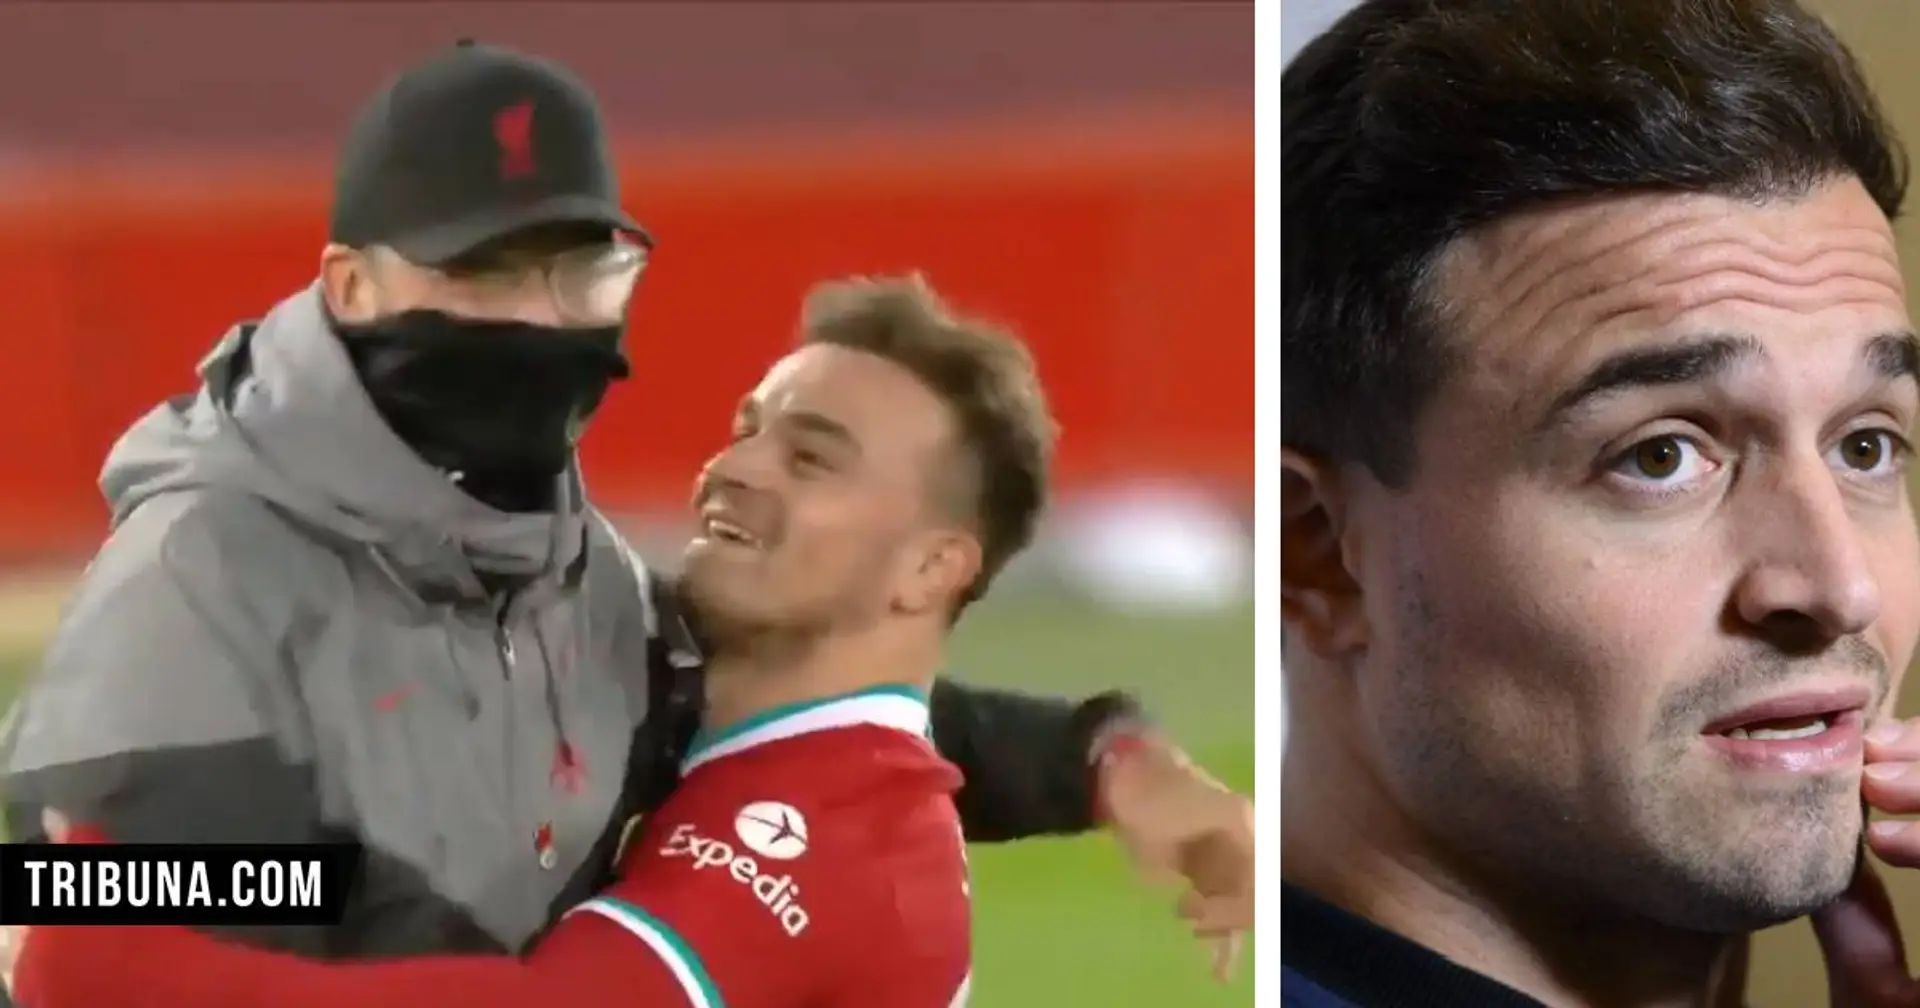 'I wanted to go sooner': Shaqiri reveals why he decided to leave Reds, opens up on relationship with Klopp